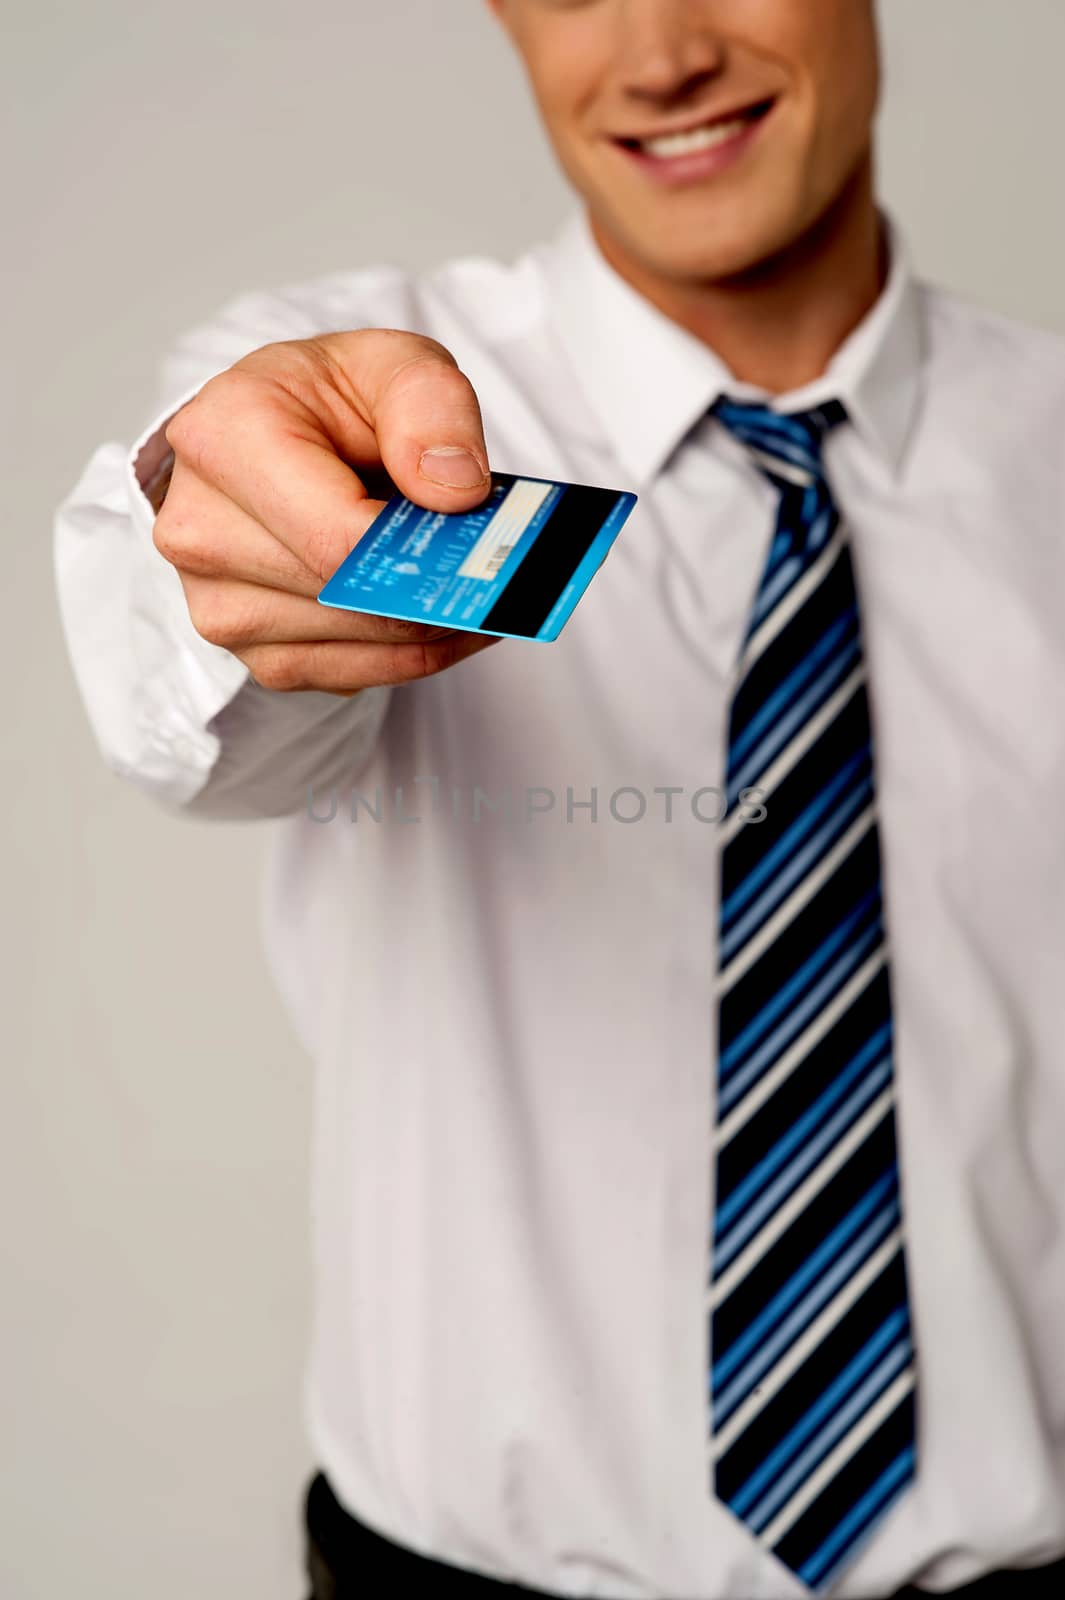 Take my card for payment.  by stockyimages